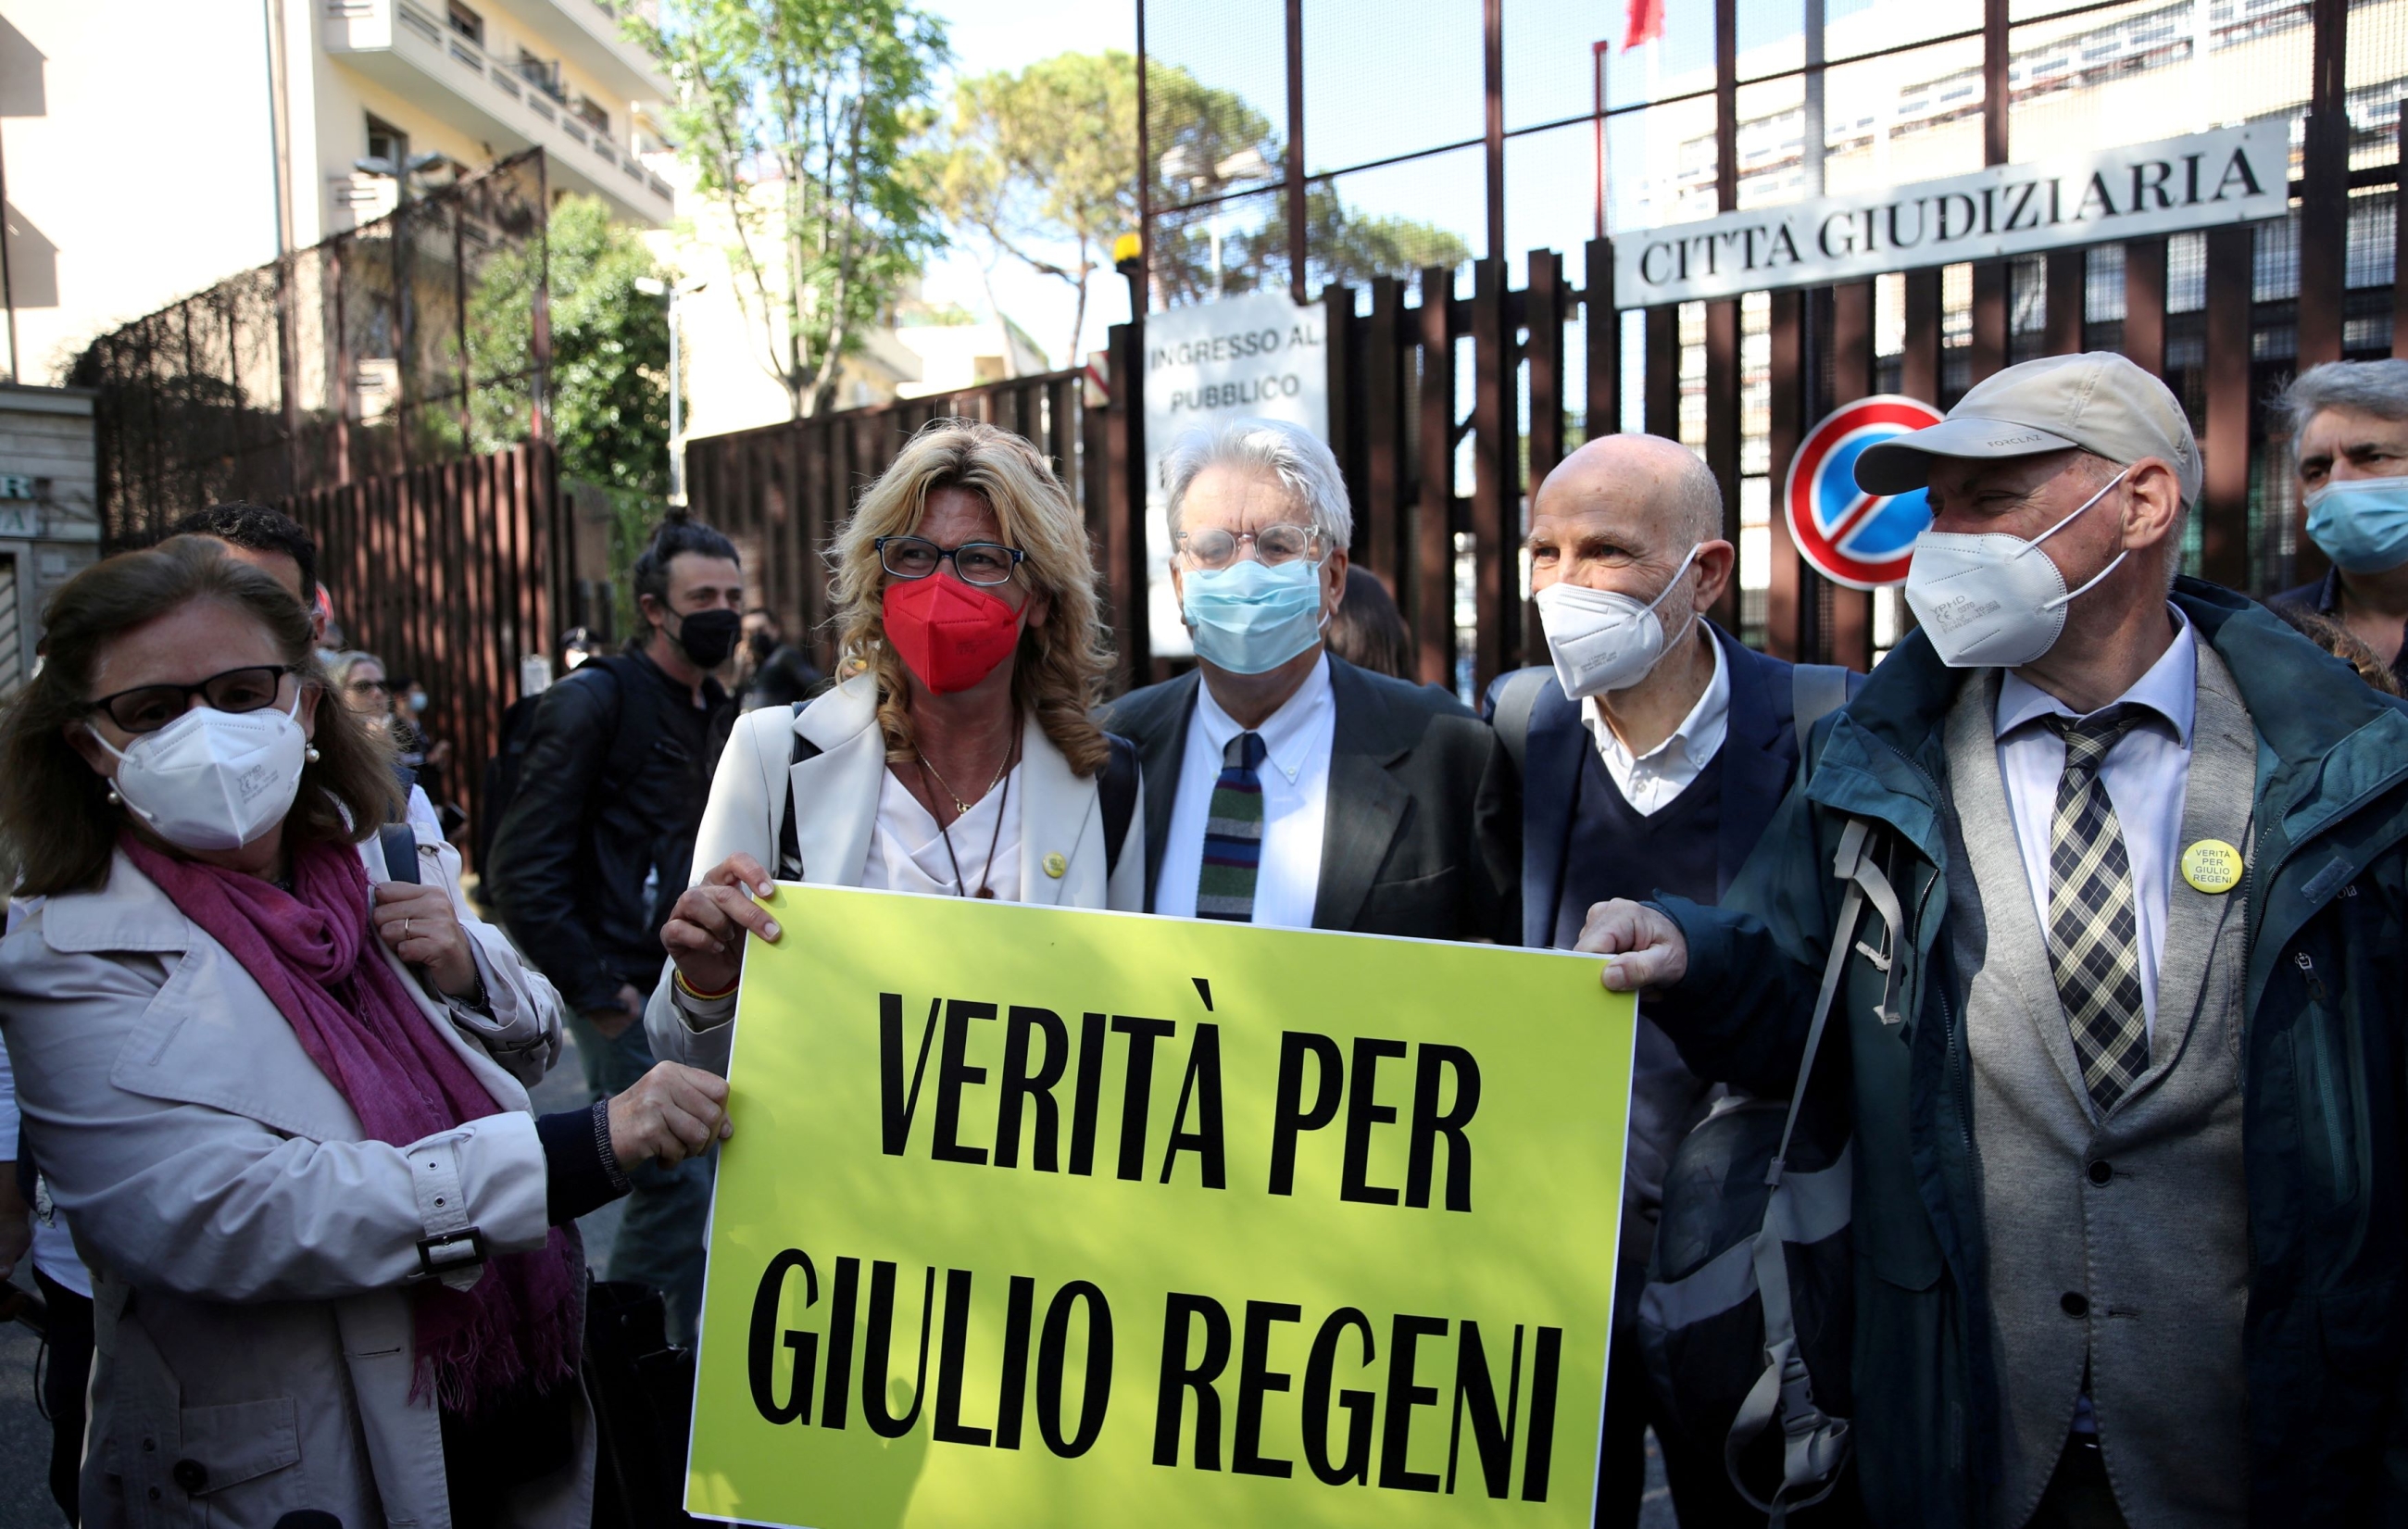  Paola and Claudio Regeni stand outside the courthouse with their lawyer Alessandra Ballerini before the pre-trial hearing to decide if four high-ranking Egyptian security officers should go on trial for the 2016 Cairo abduction, torture and killing of their son Giulio Regeni, a student, in Rome, Italy, May 25, 2021. Sign reads, "Truth for Giulio Regeni" (Reuters)